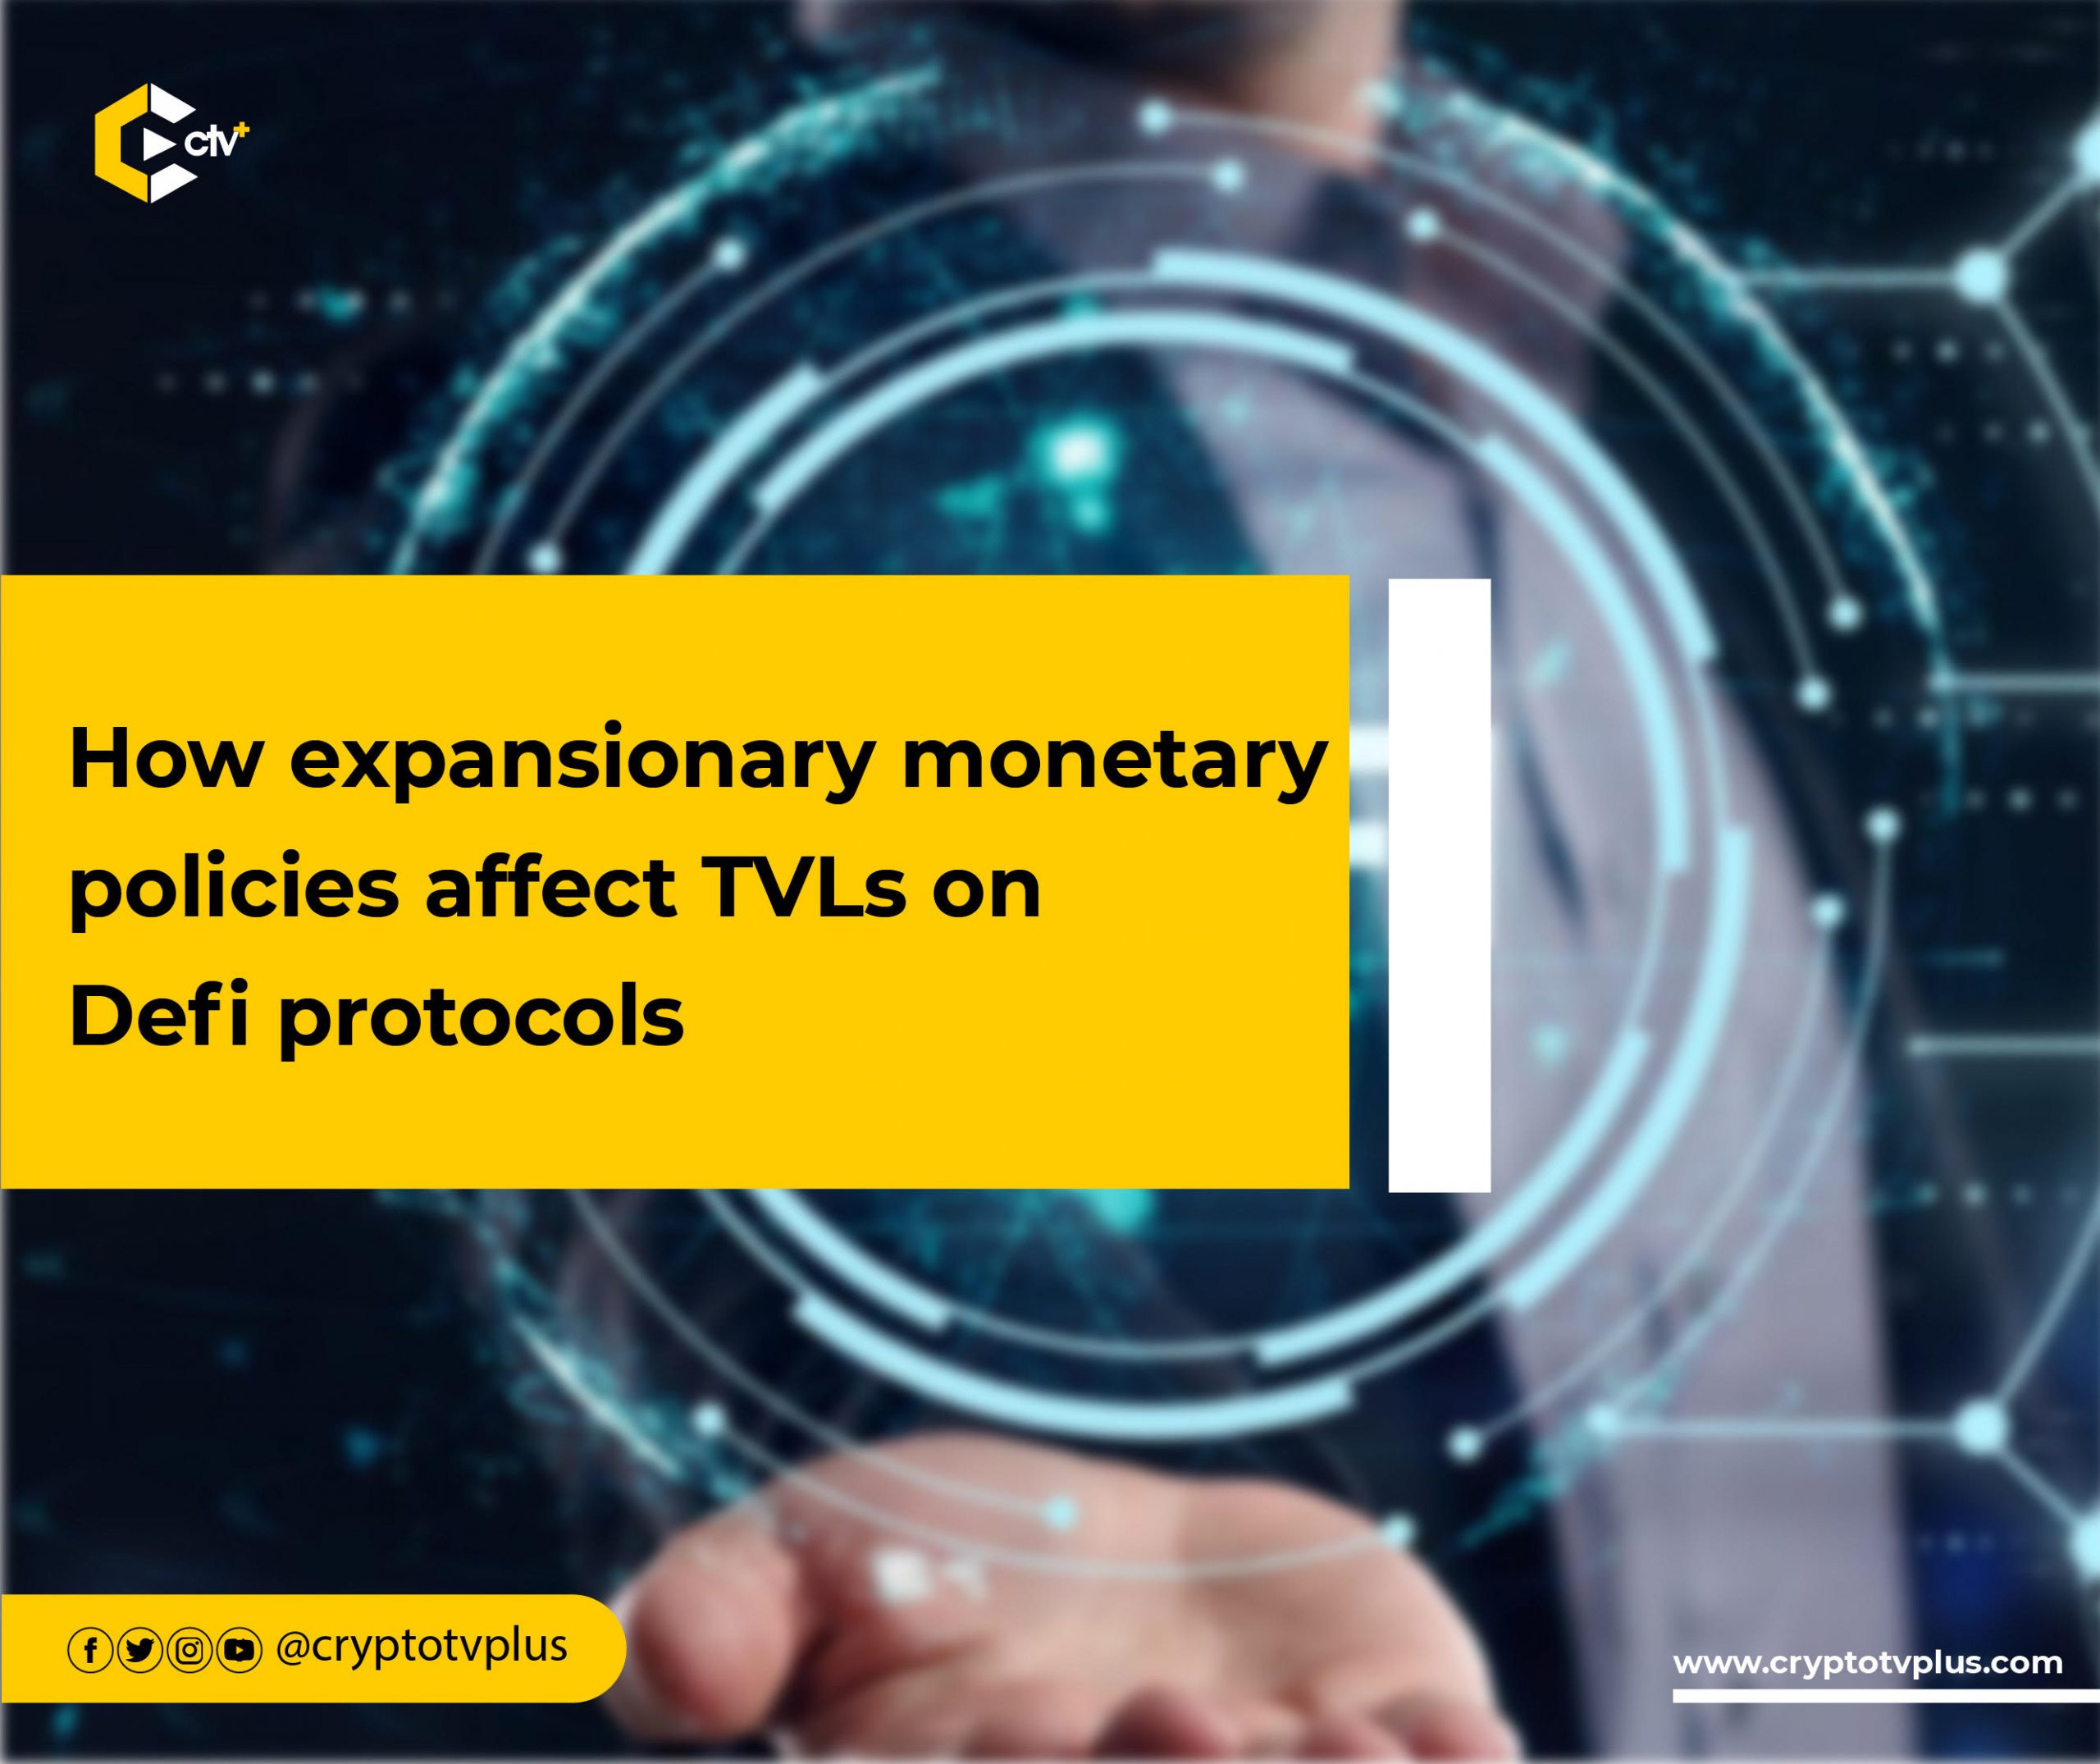 How expansionary monetary policies affect TVLs on Defi protocols